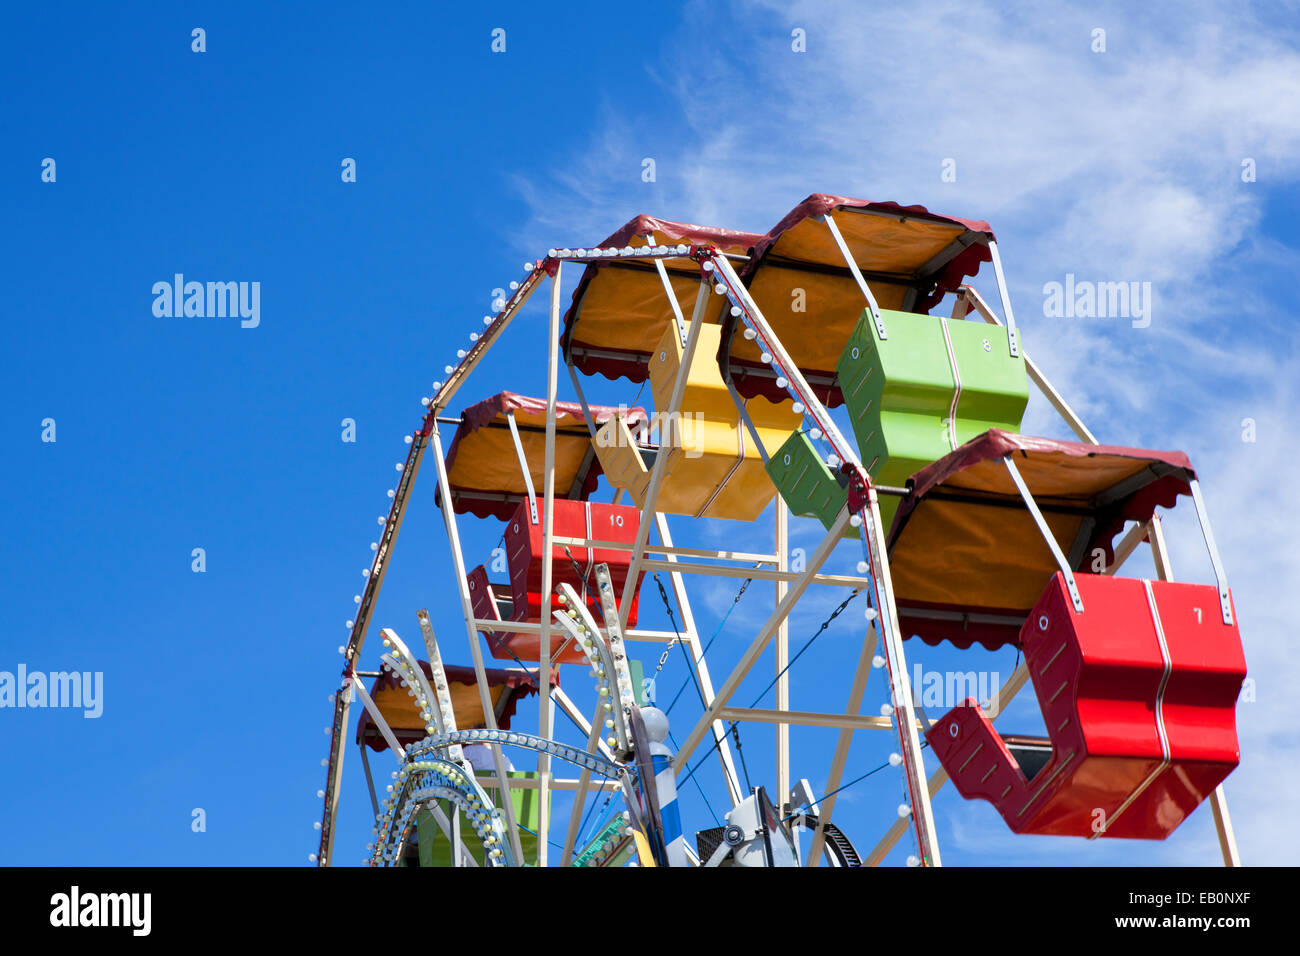 colorful carousel at a fairground against a blue sky Stock Photo